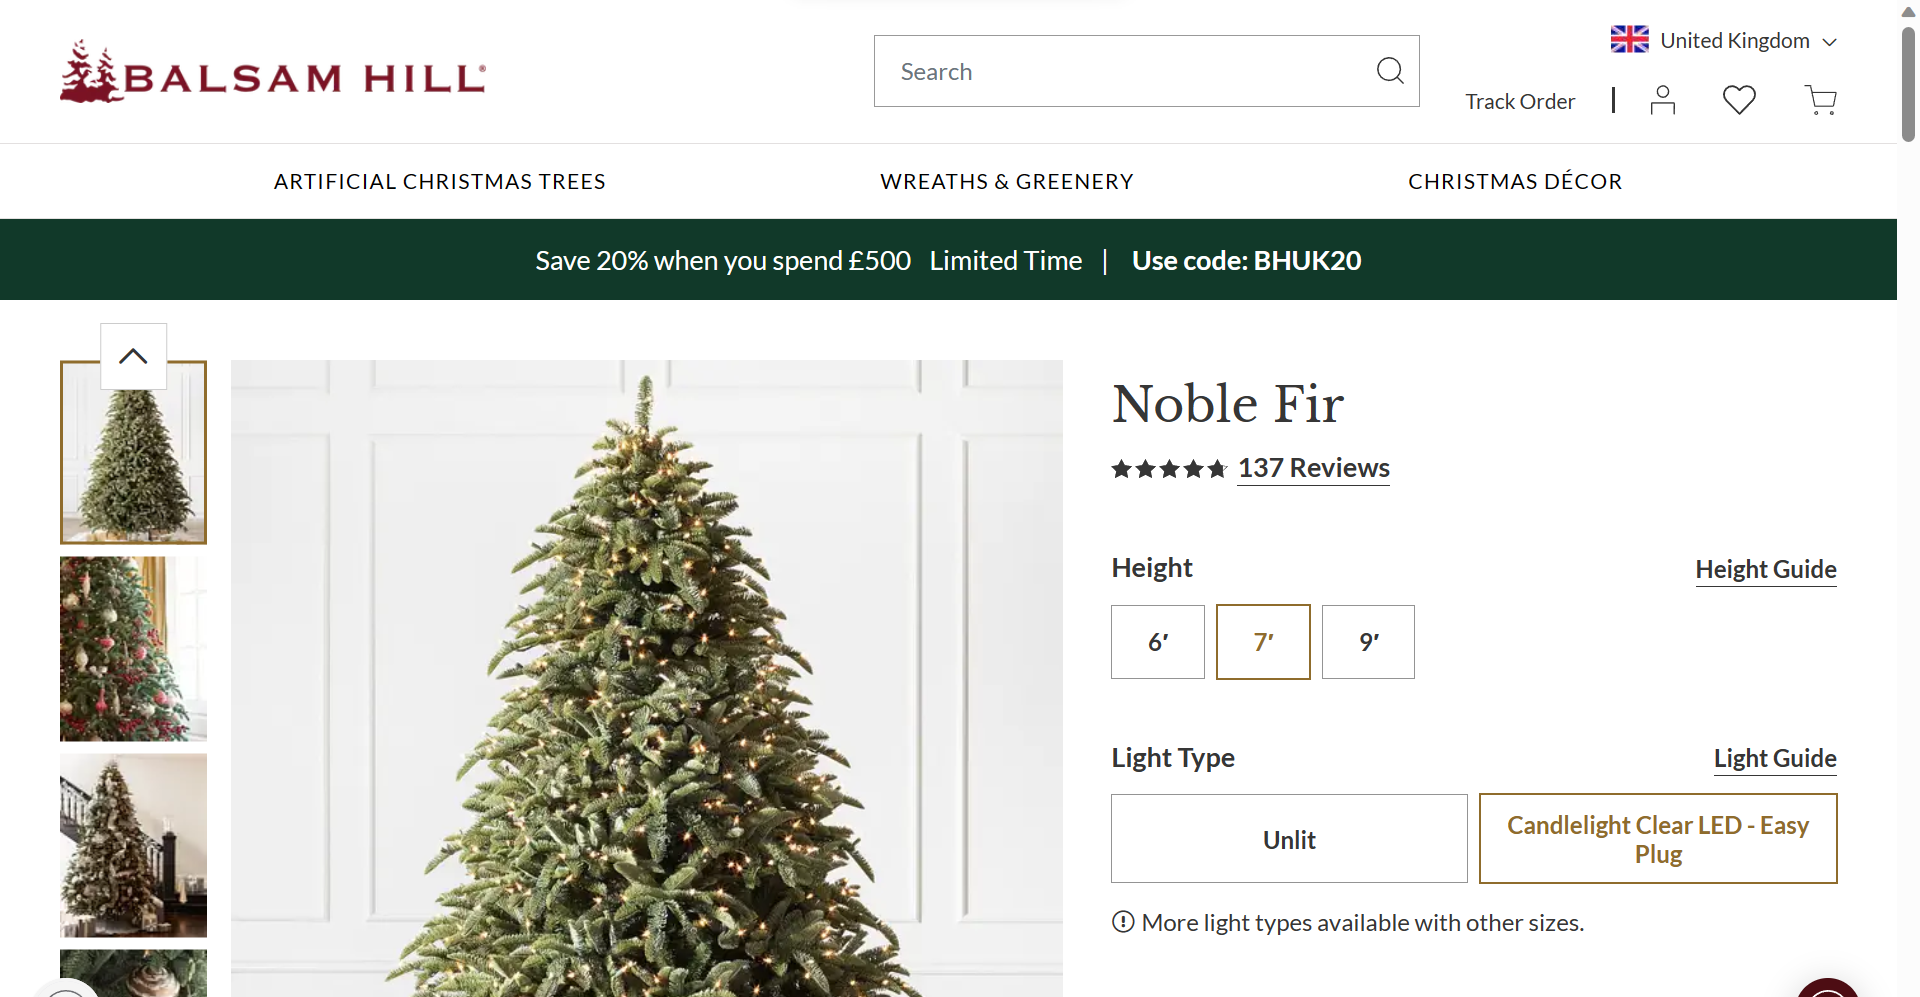 BH (The worlds leading Christmas Trees) New & Boxed Noble Fir 7ft tree with LED Clear Lights. - - Image 2 of 2